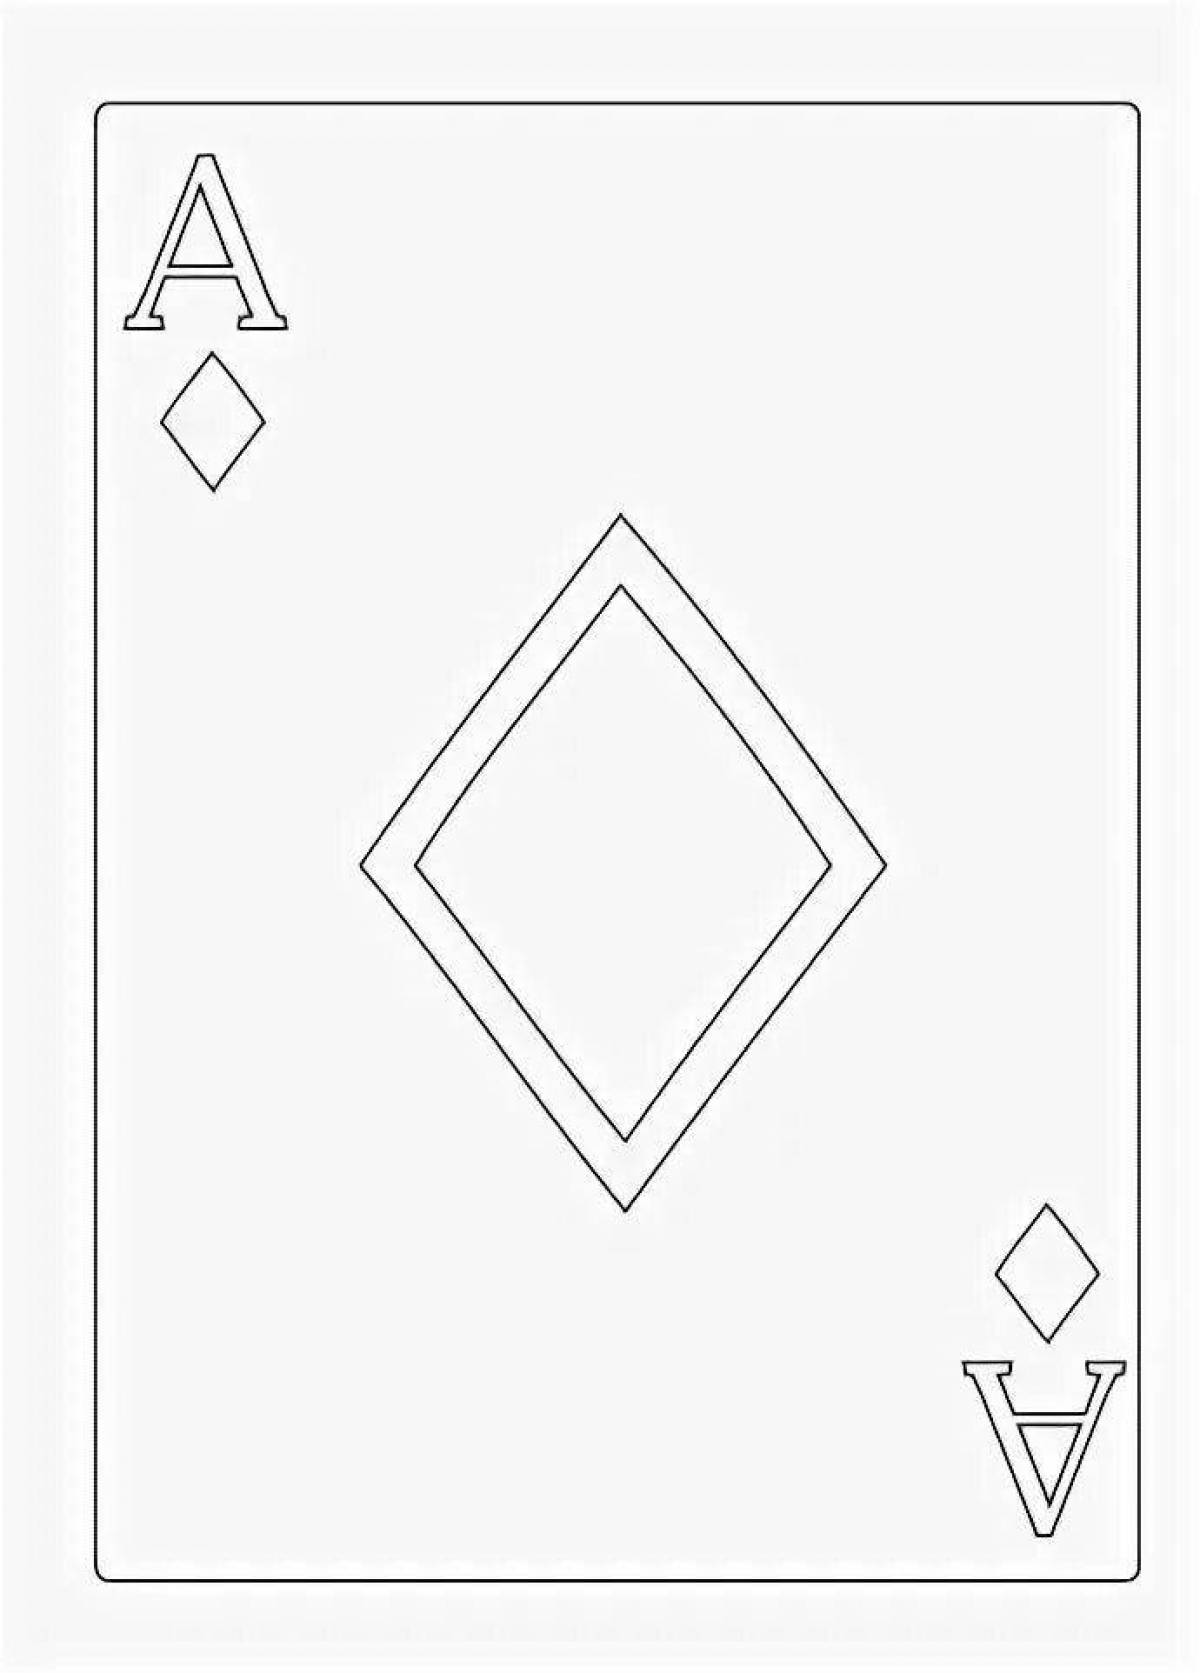 Playing cards #10